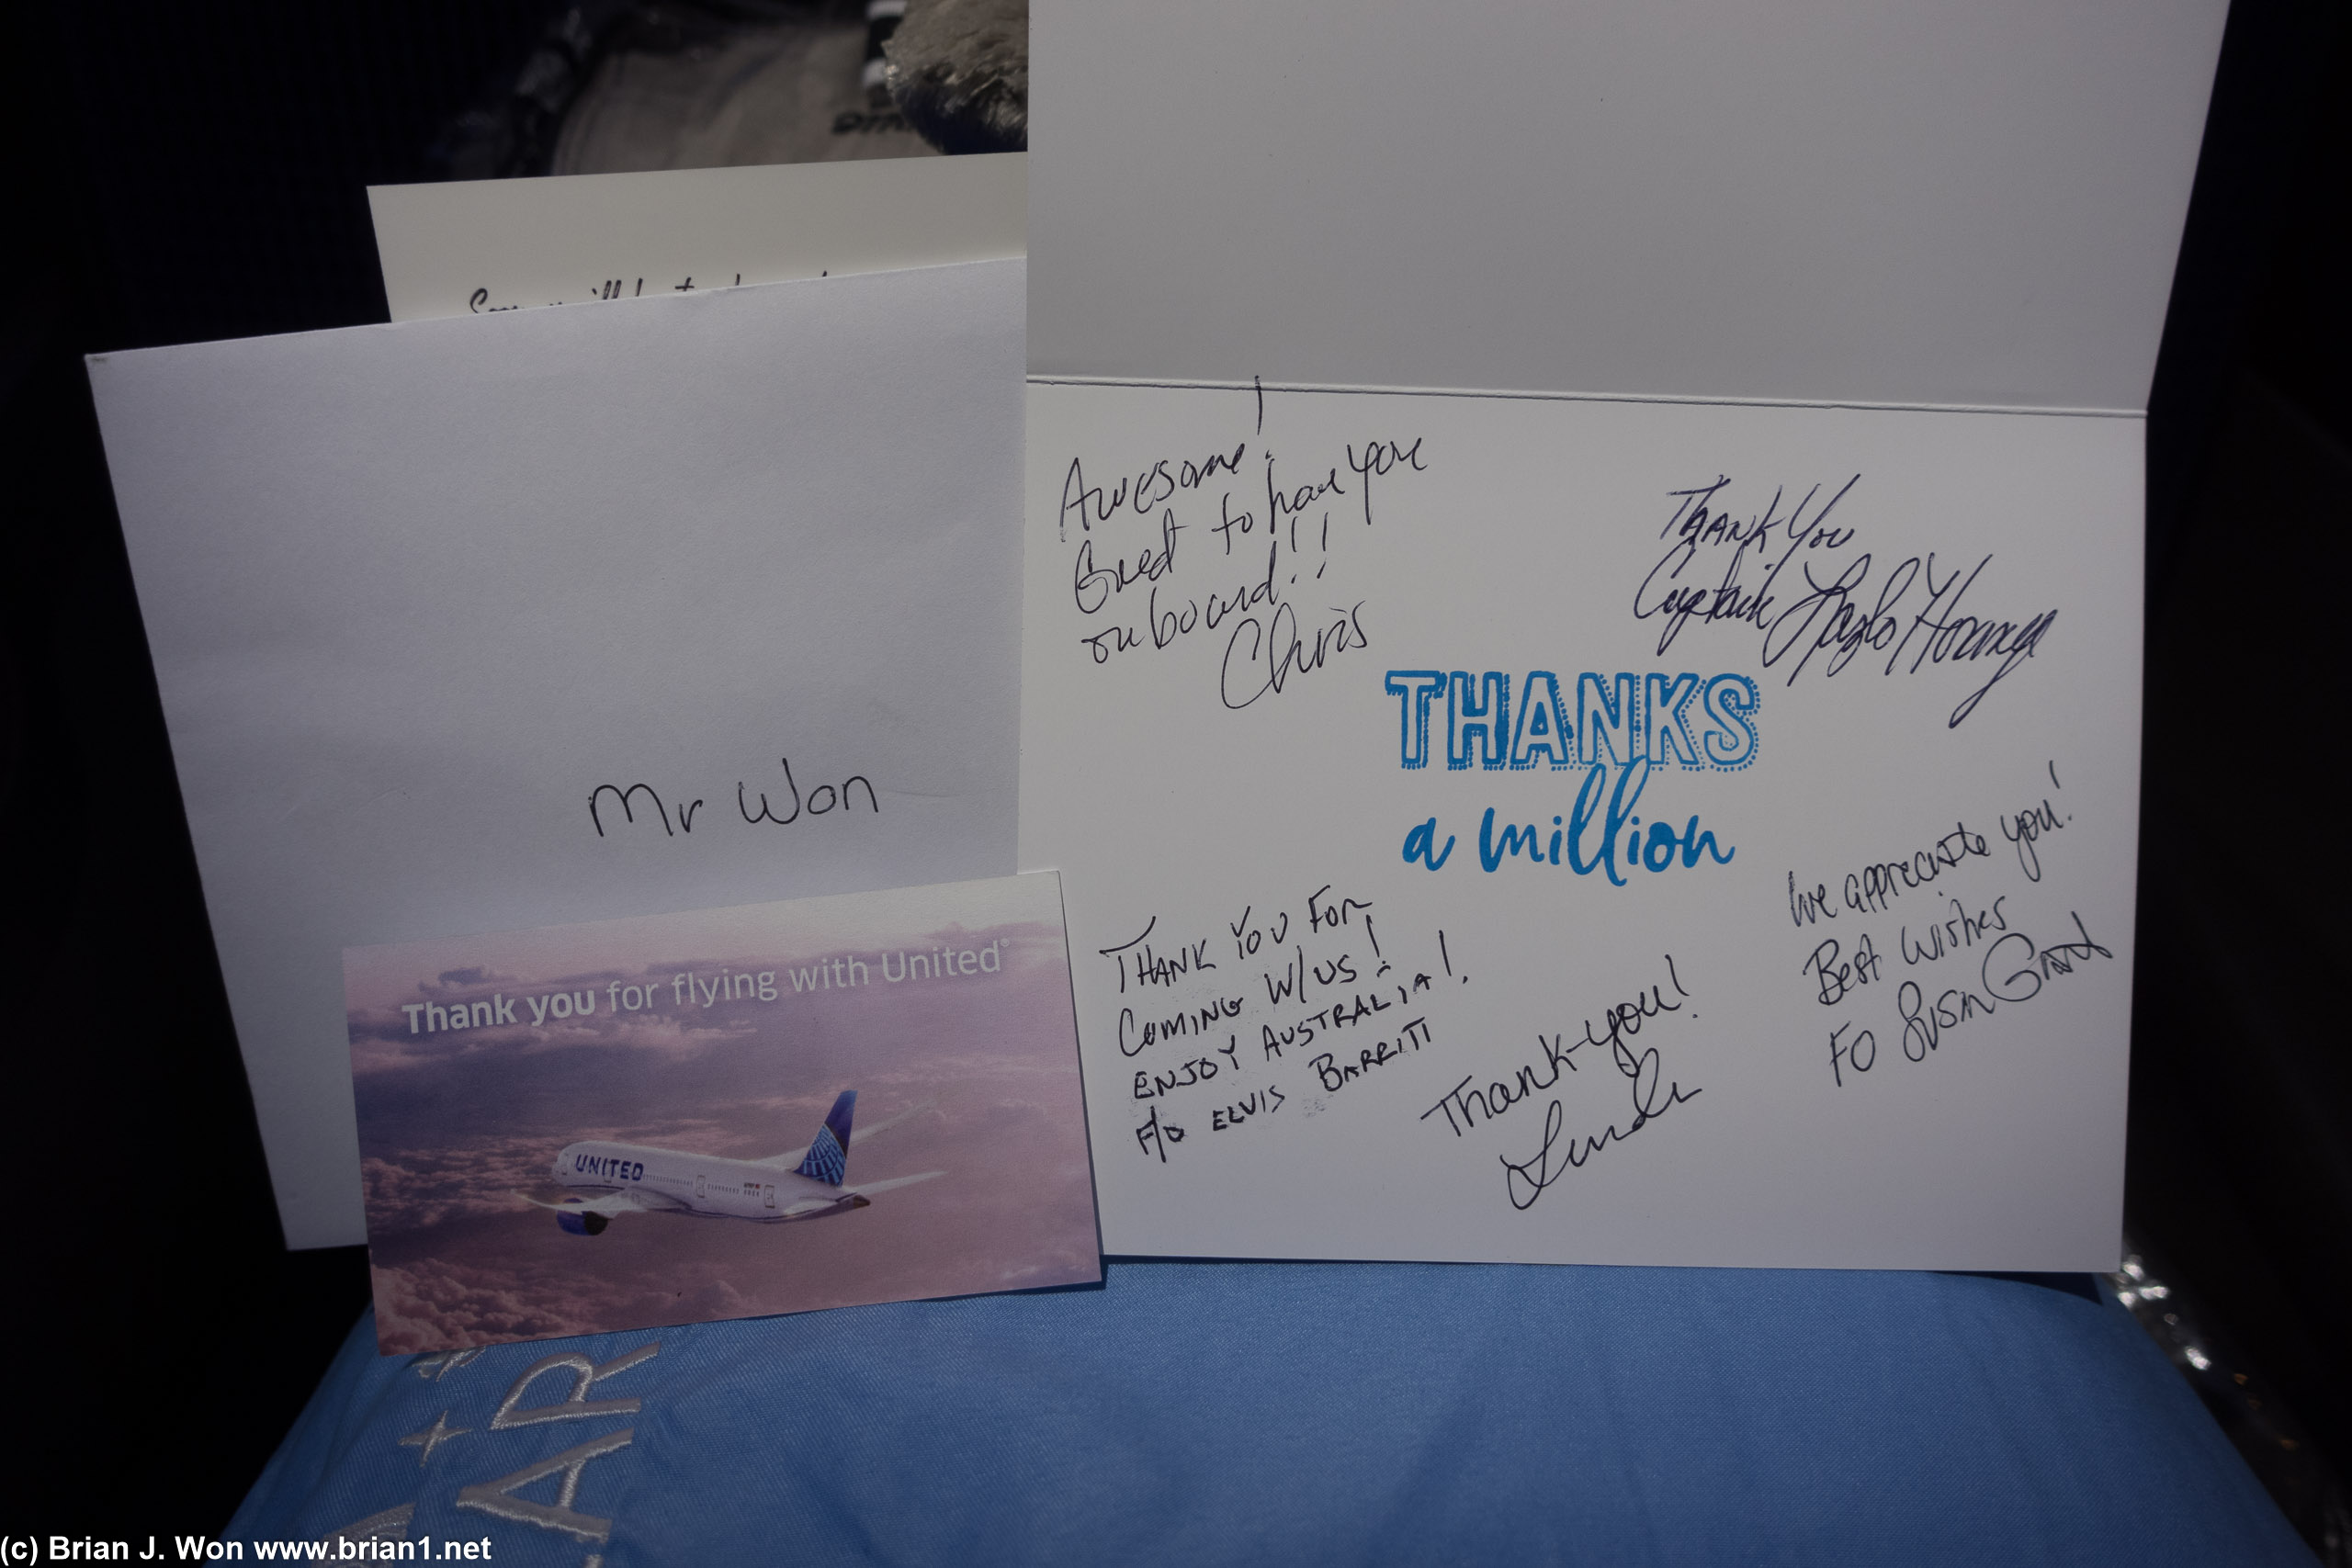 Swag for my 1,000,000th mile on United including a card signed by all the pilots.